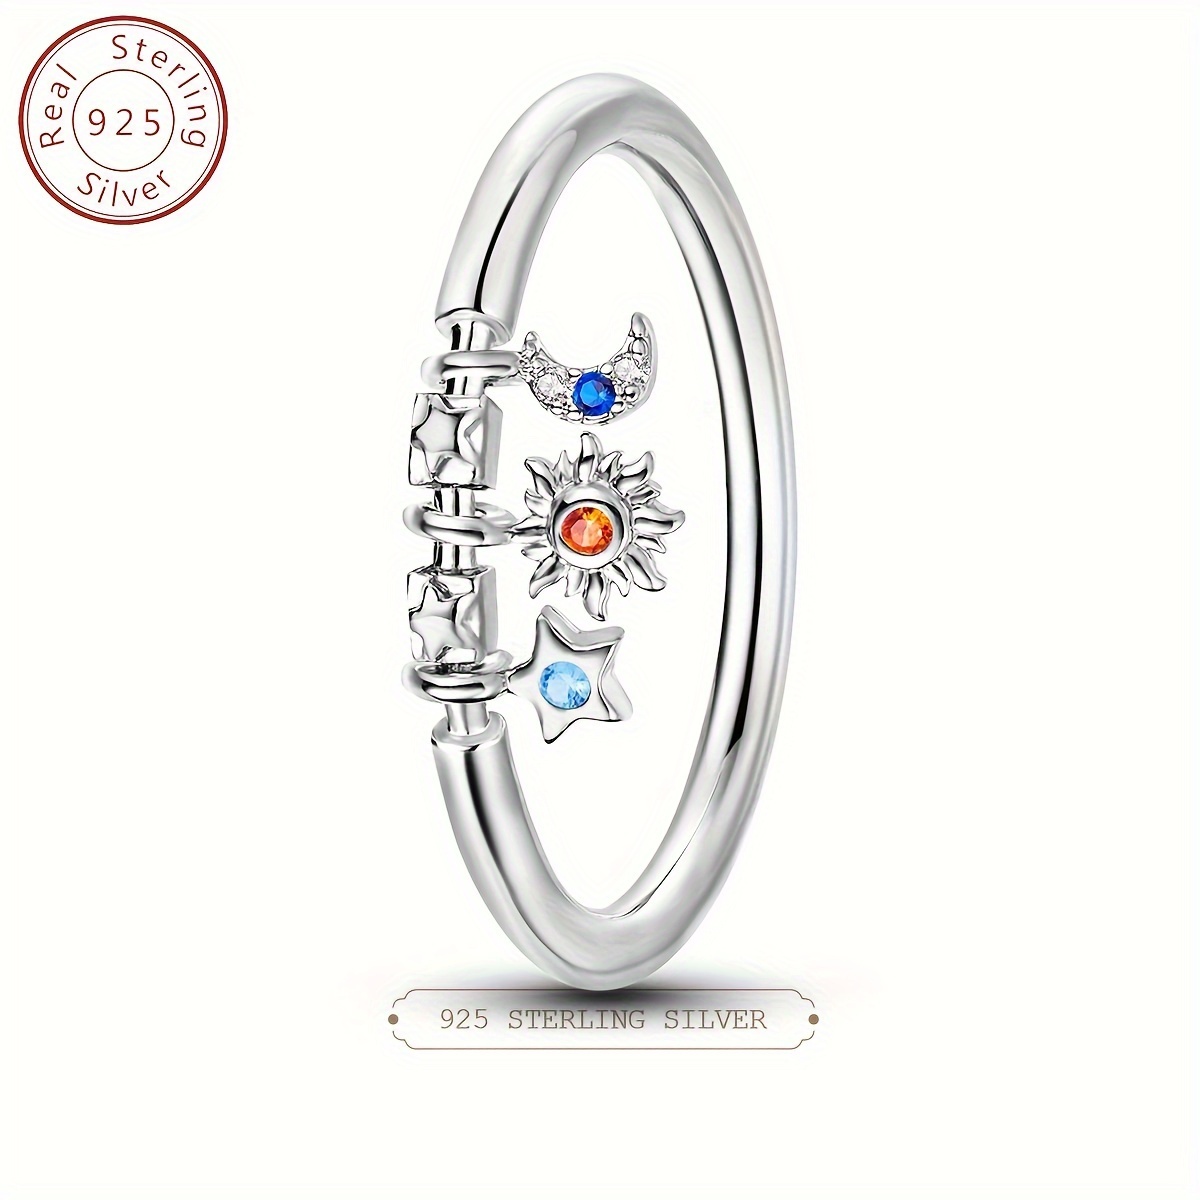 

1pc, Elegant & Classic Style, 925 Sterling Silvery Sun, Moon And Star Shape Design Pendant, Inlay Shiny Color Zircon Wide Ring, Fashion Delicate Accessory For Wedding & Party, Idea Gift For Ladies